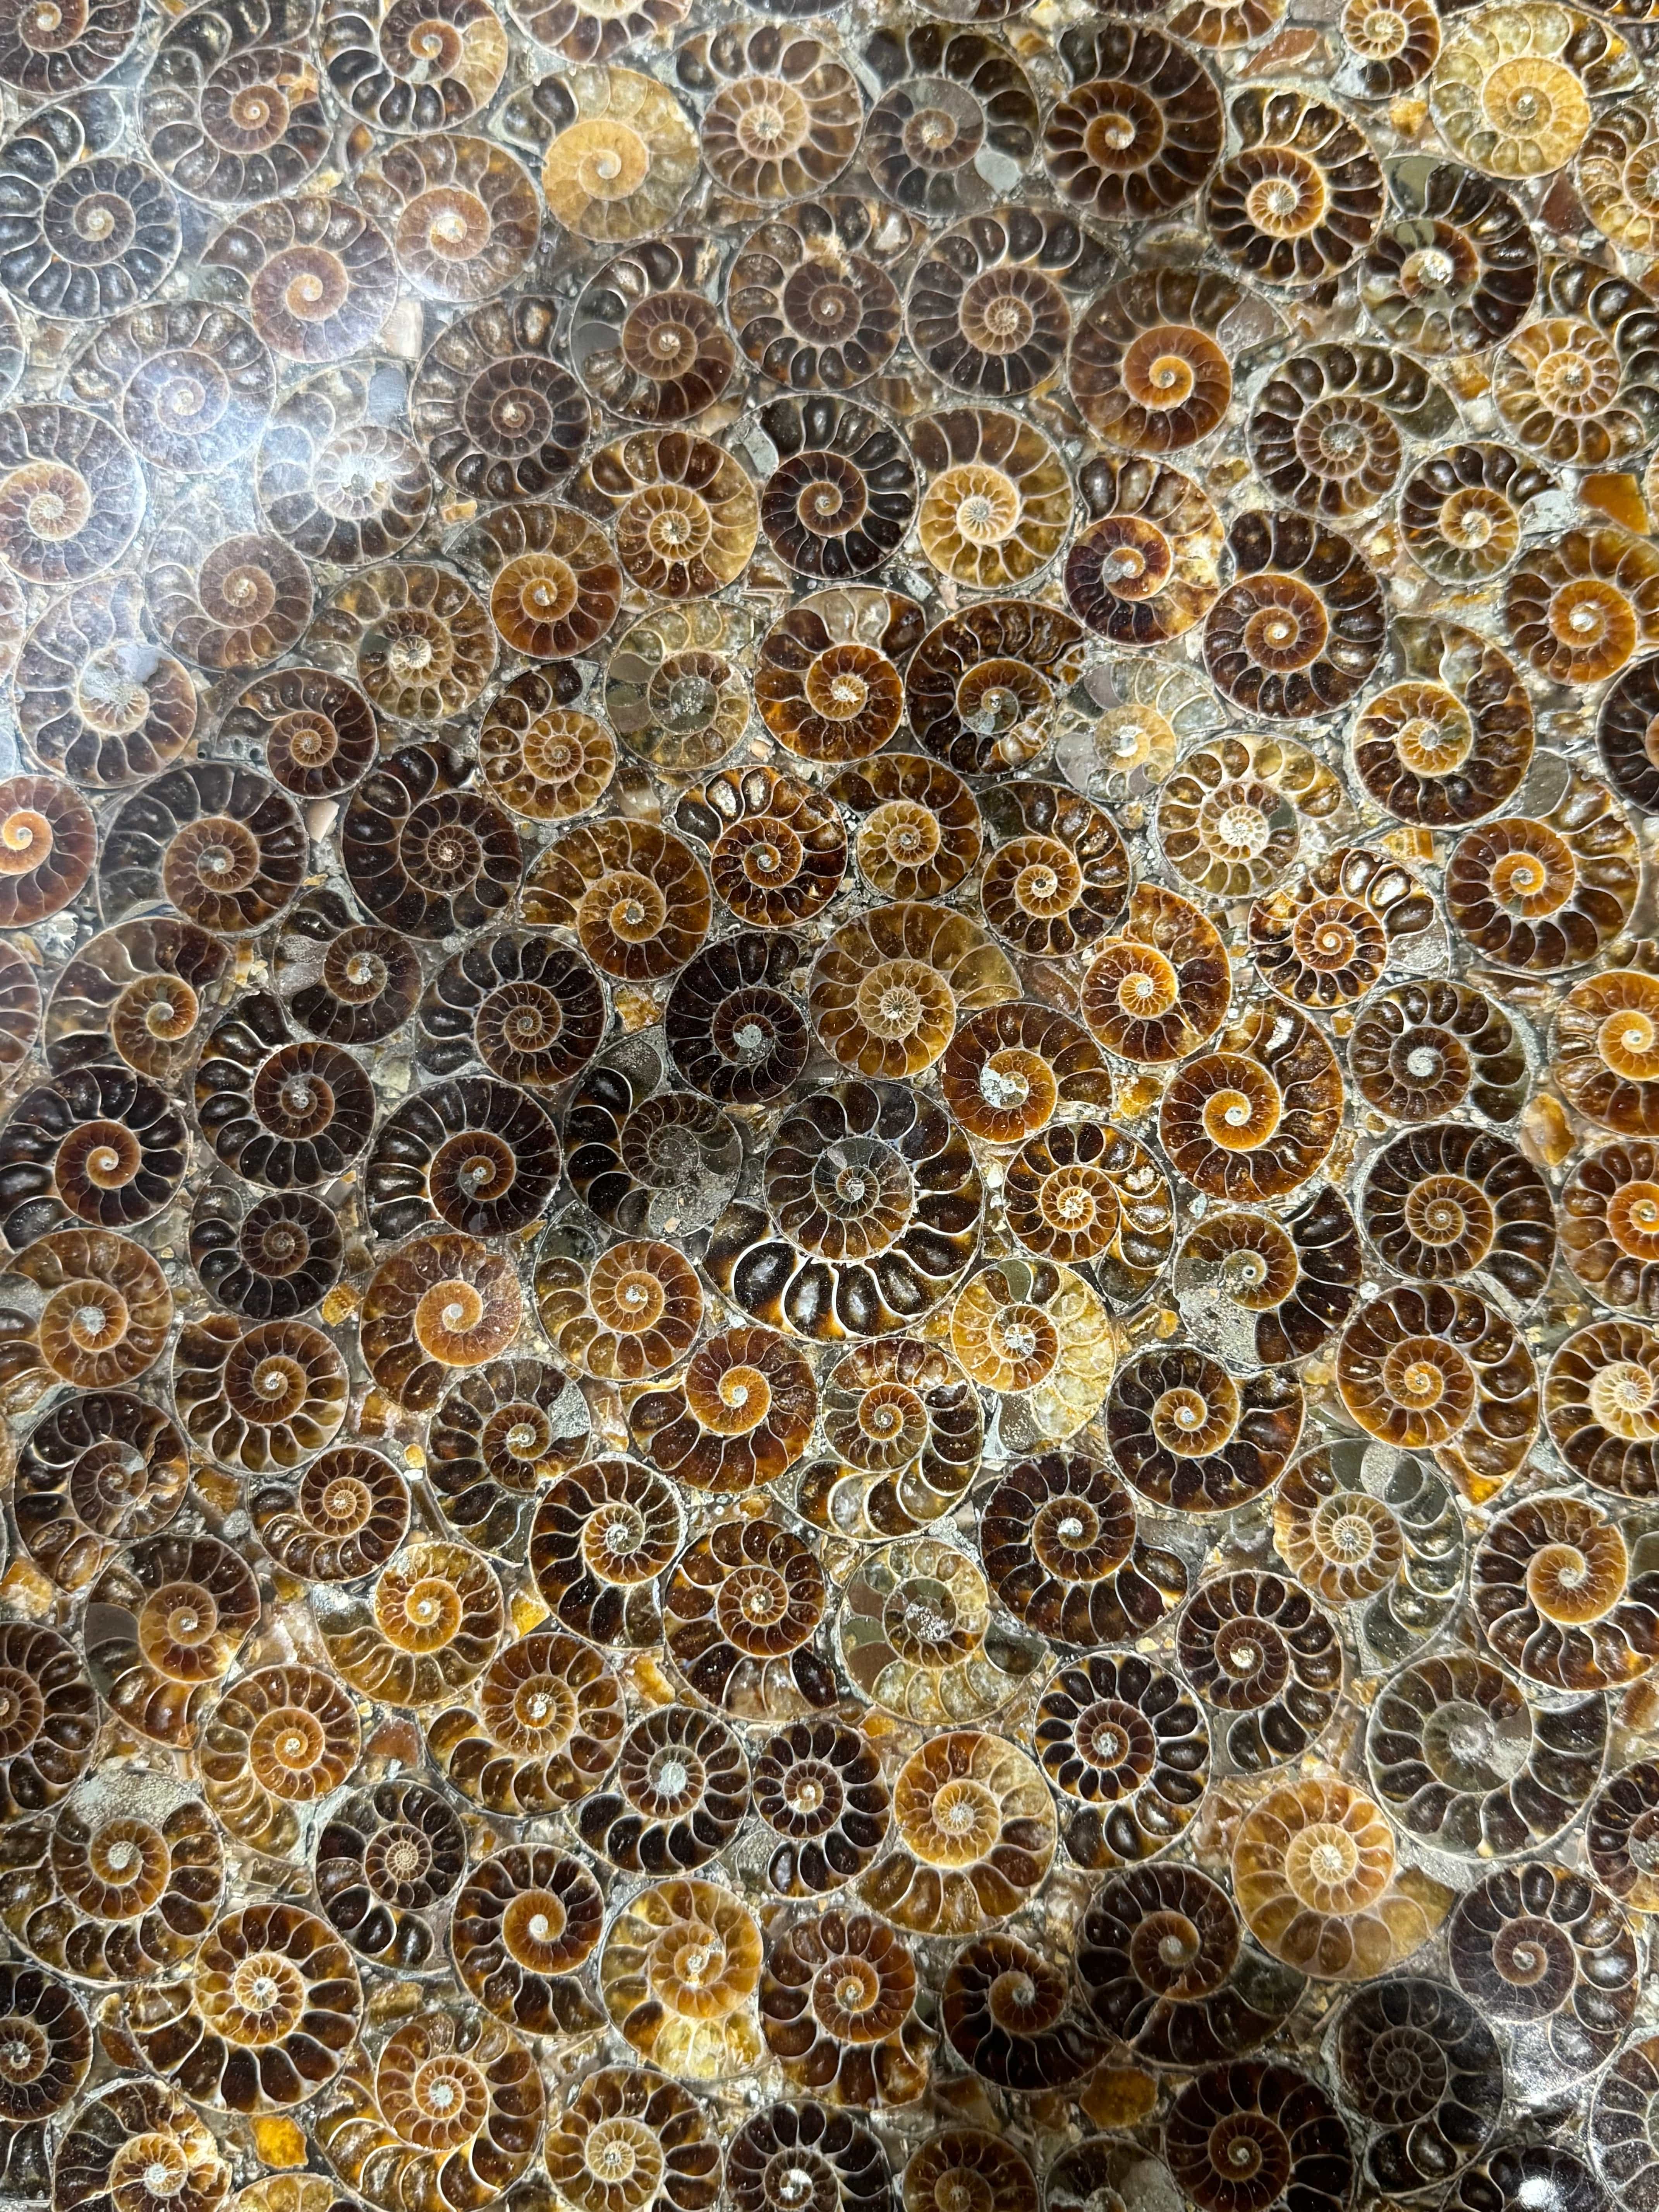 Kalifano Fossils & Minerals Ammonite Table from Madagascar - 24" AMM9600.001